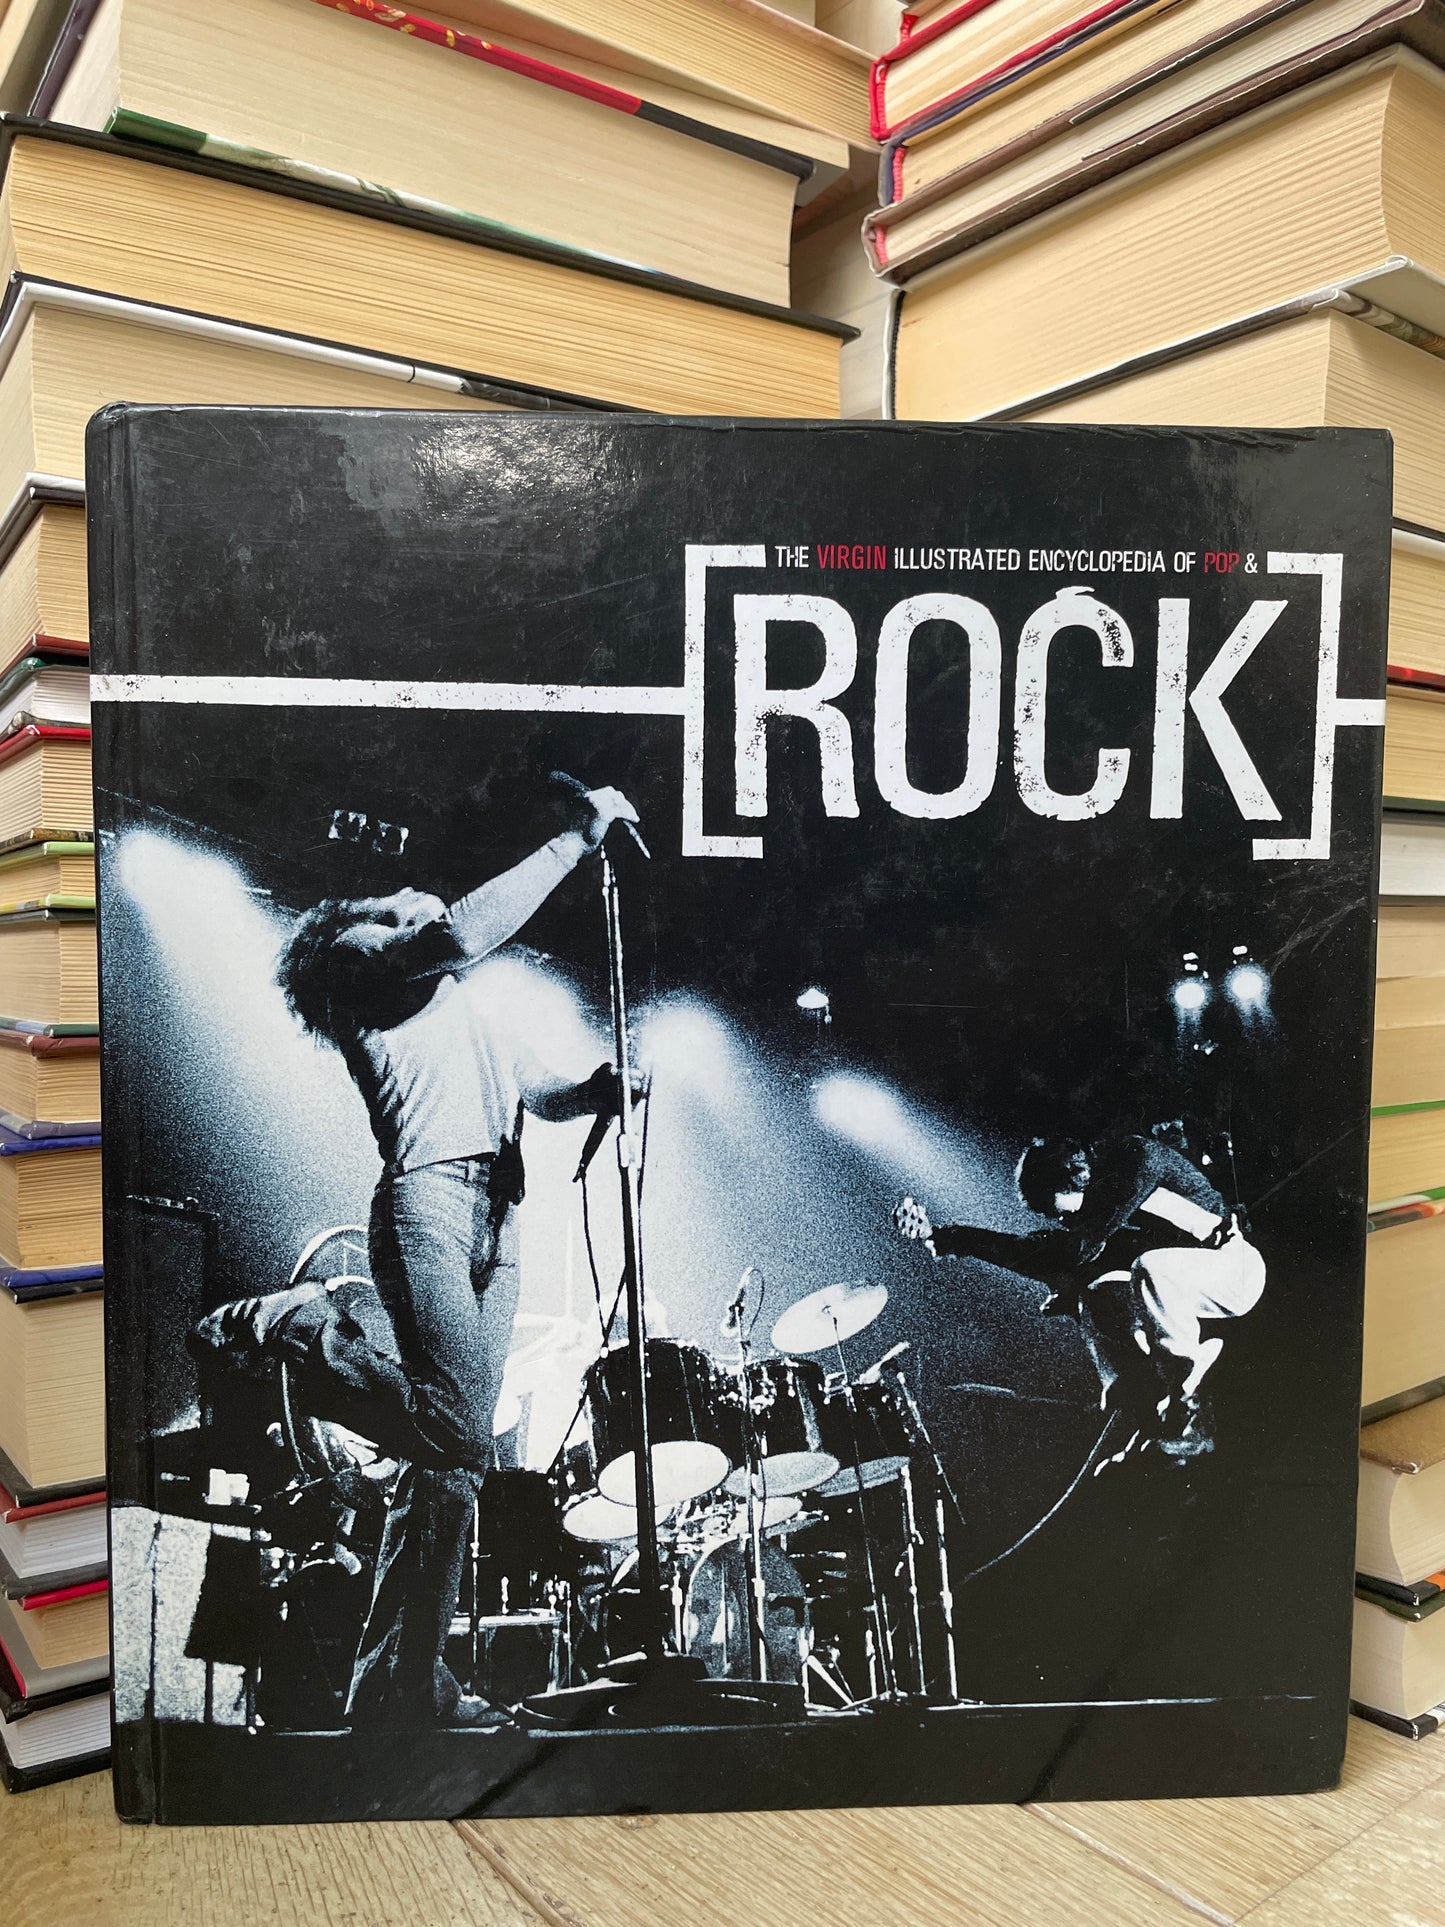 The Virgin Illustrated Encyclopedia of Pop and Rock